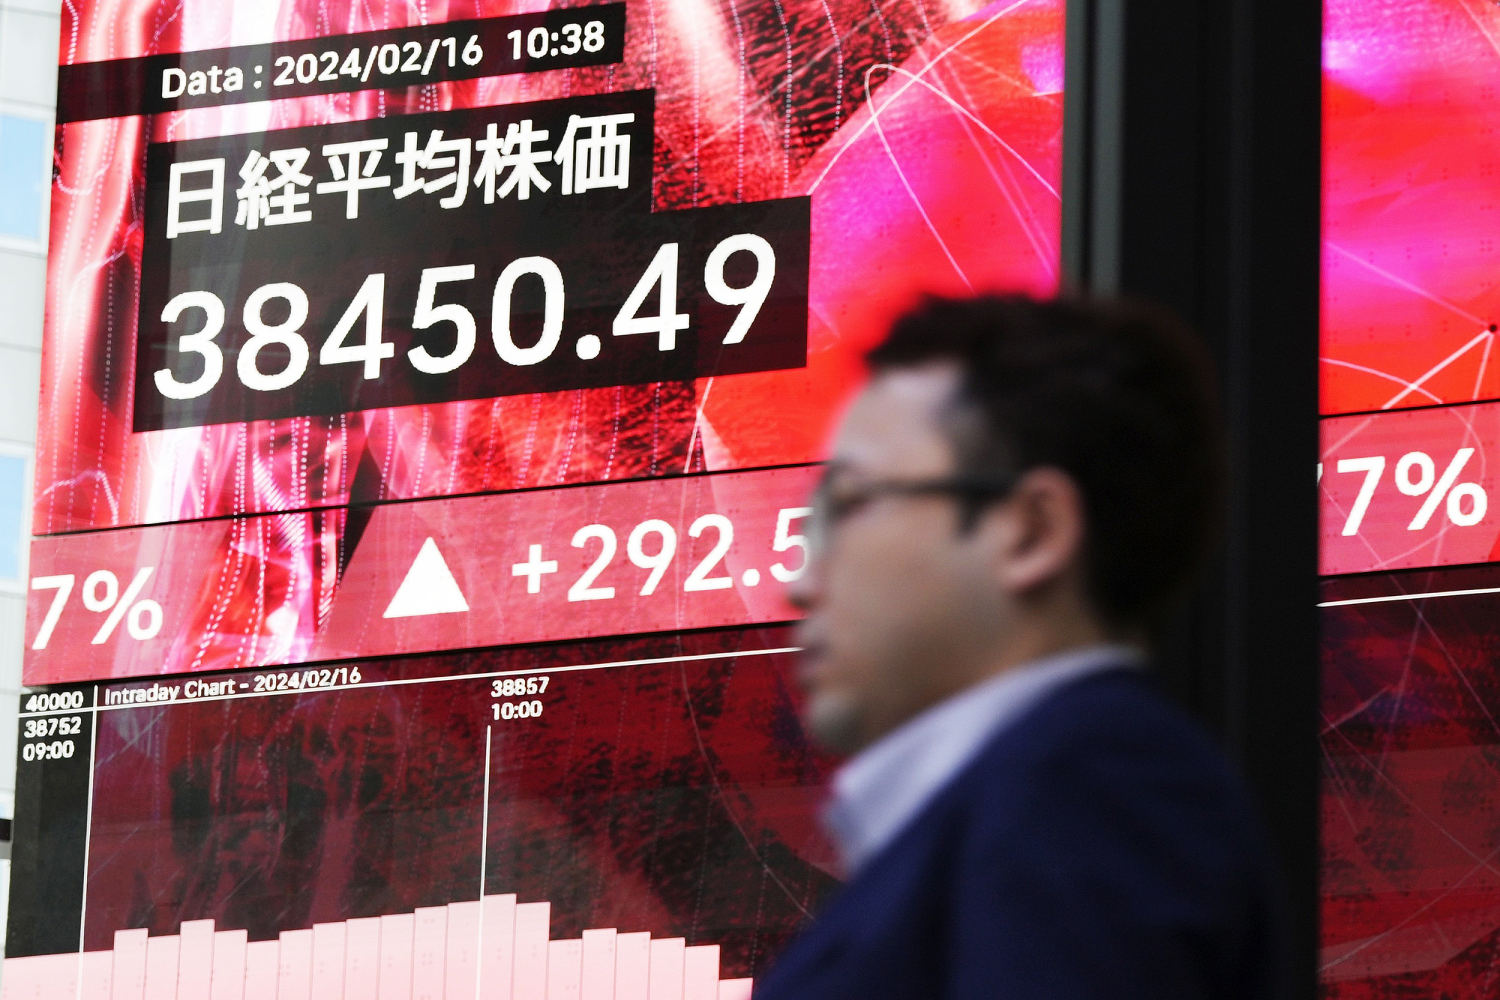 japan’s nikkei stock market index hits all-time high, breaking 1989 record